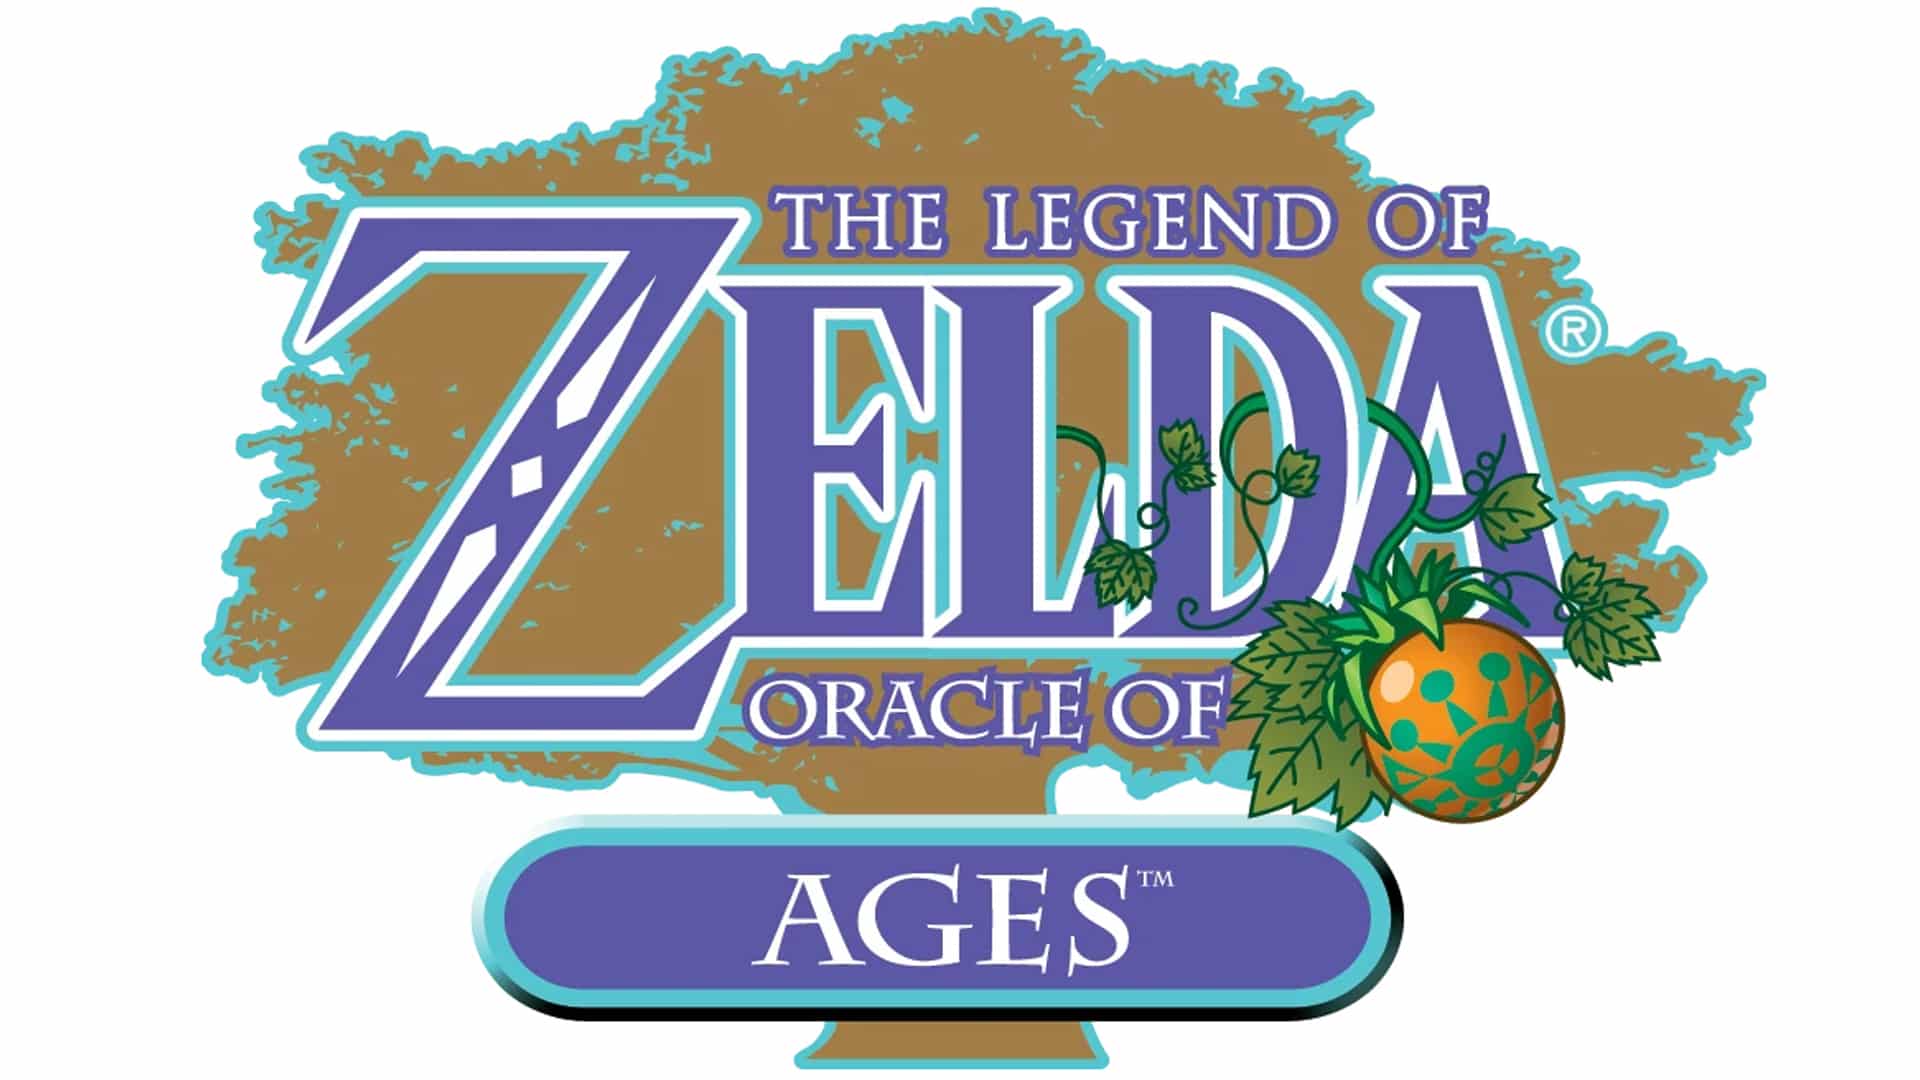 Oracle of ages